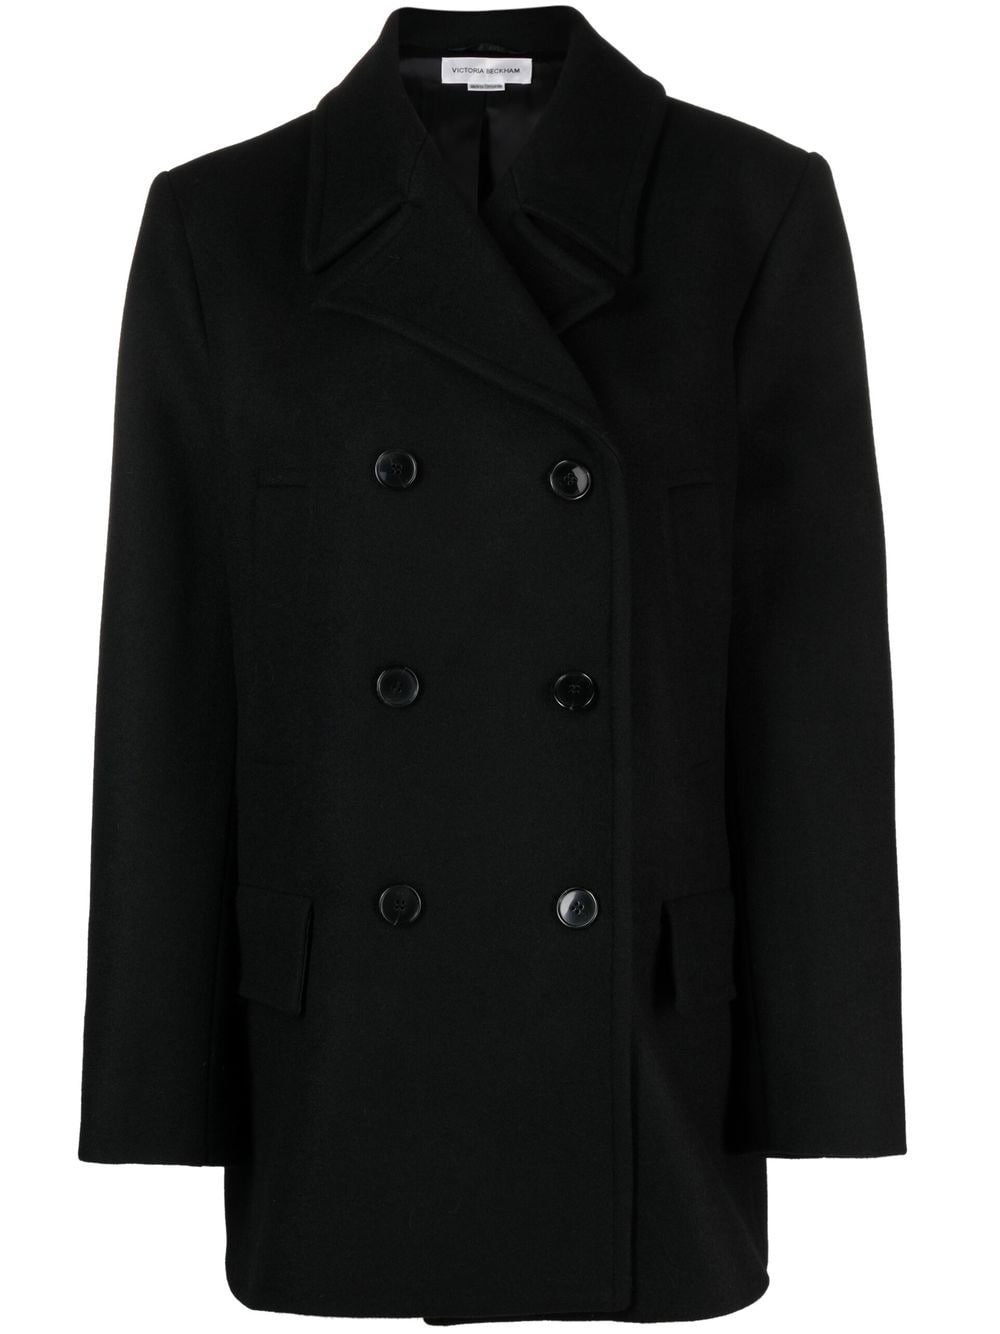 Victoria Beckham Pea double-breasted Tailored Jacket - Farfetch